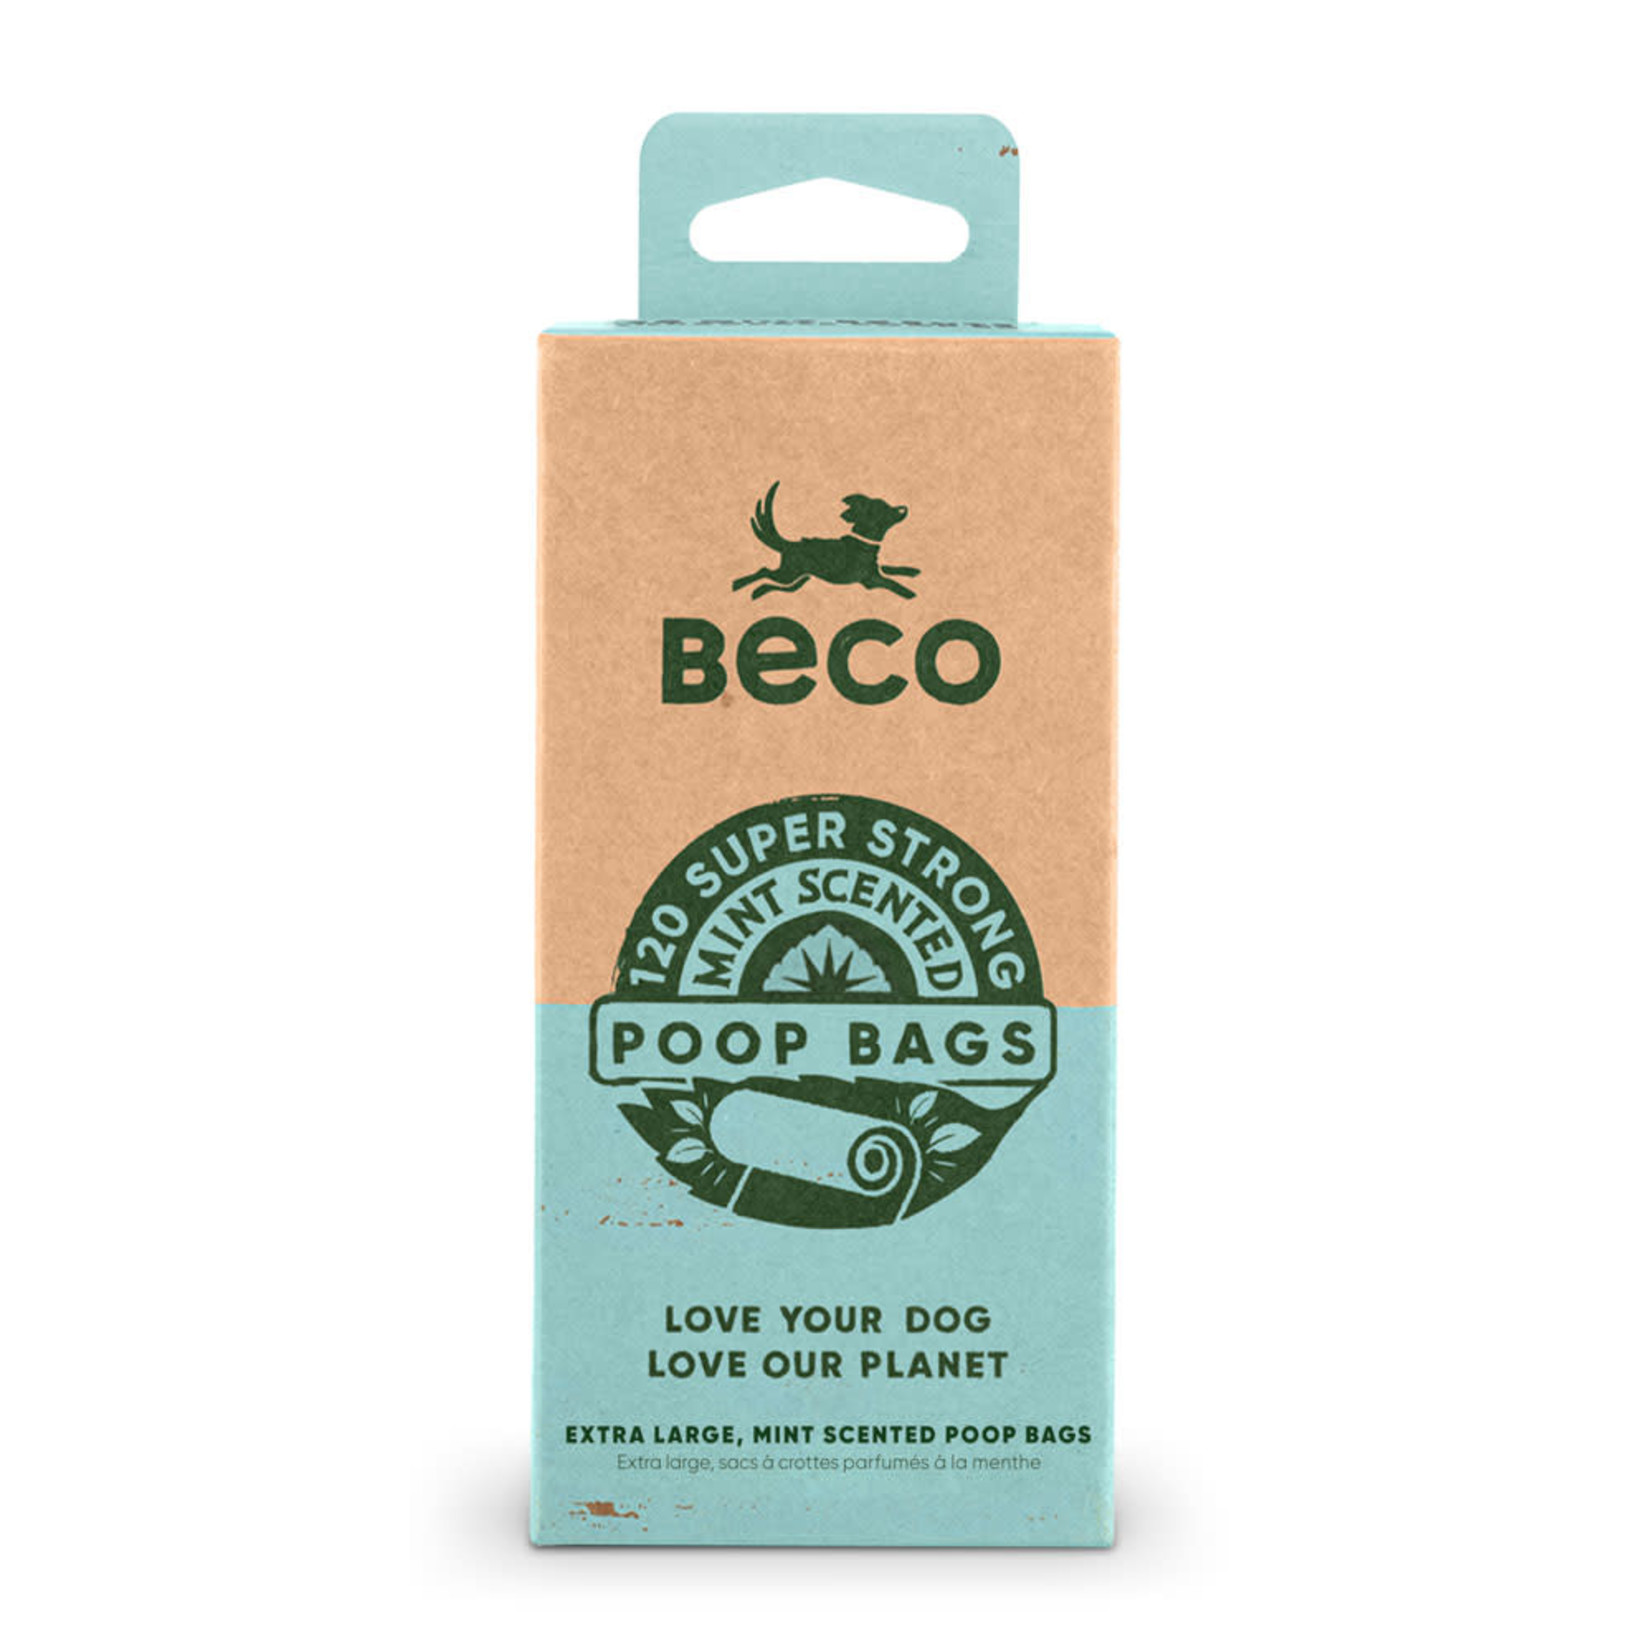 Beco Eco-Friendly Mint Scented Degradable Poop Bags 120 bags